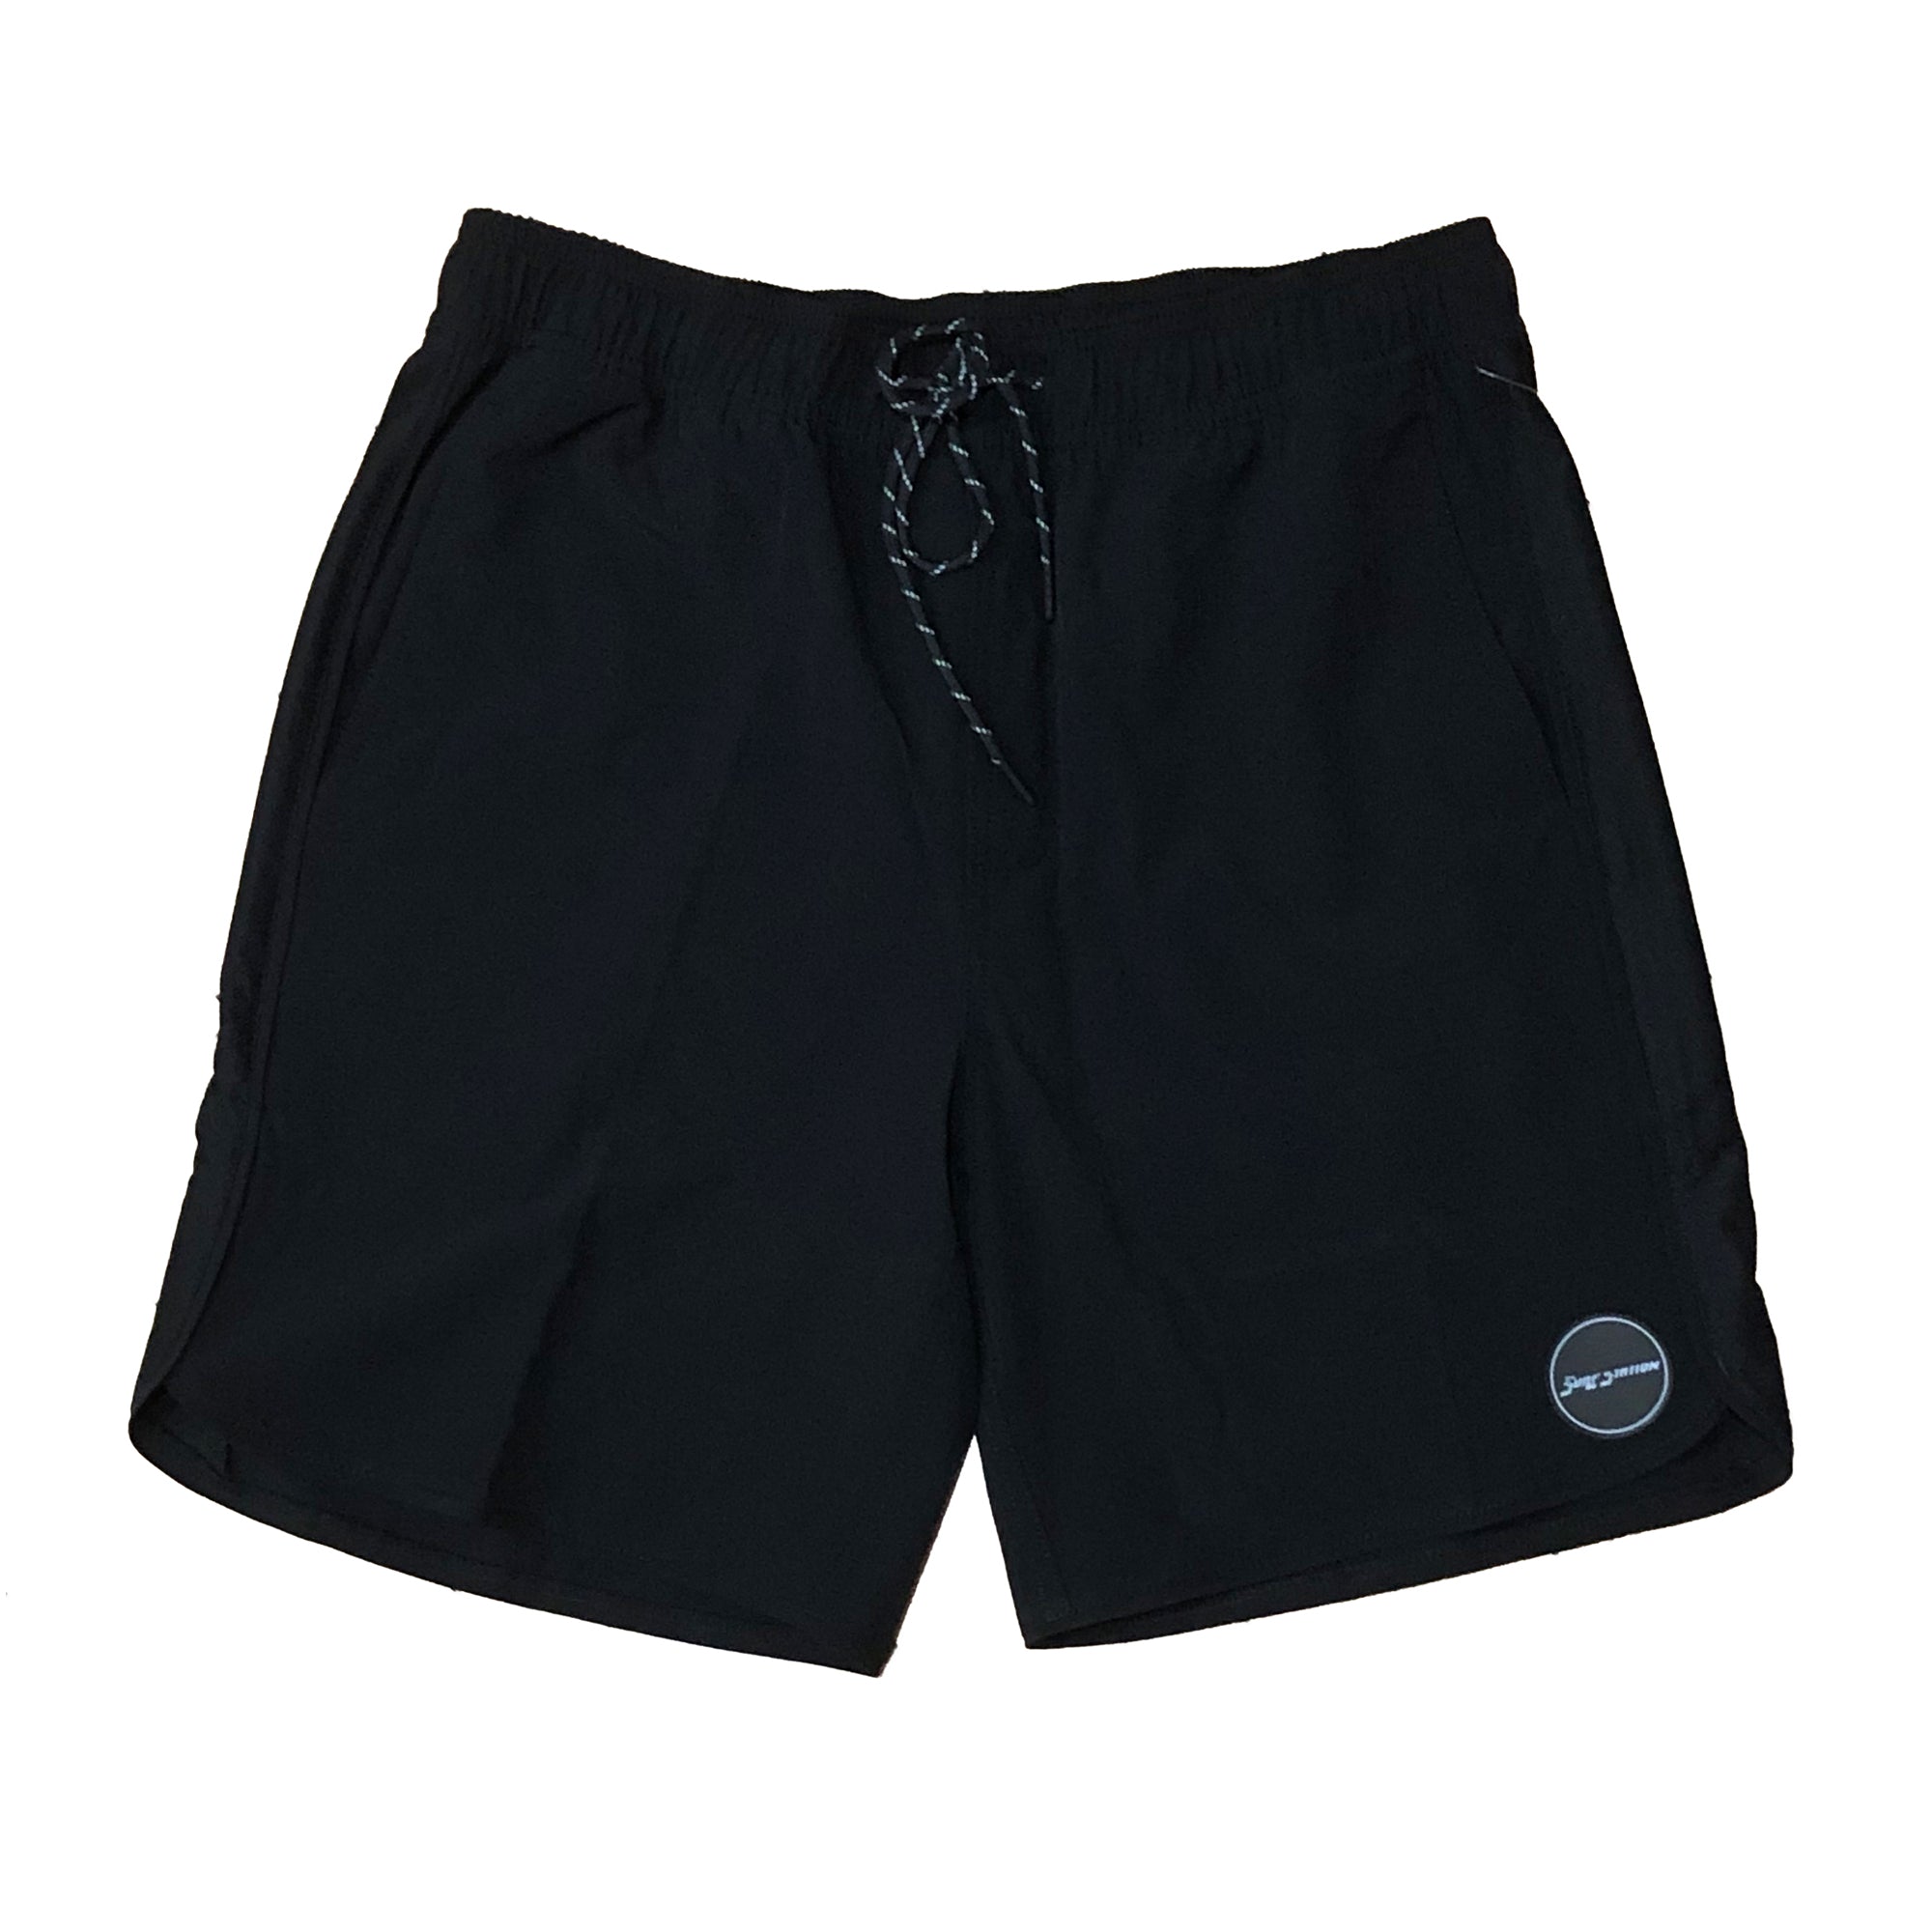 Surf Station Chongy Men's Work Out Shorts